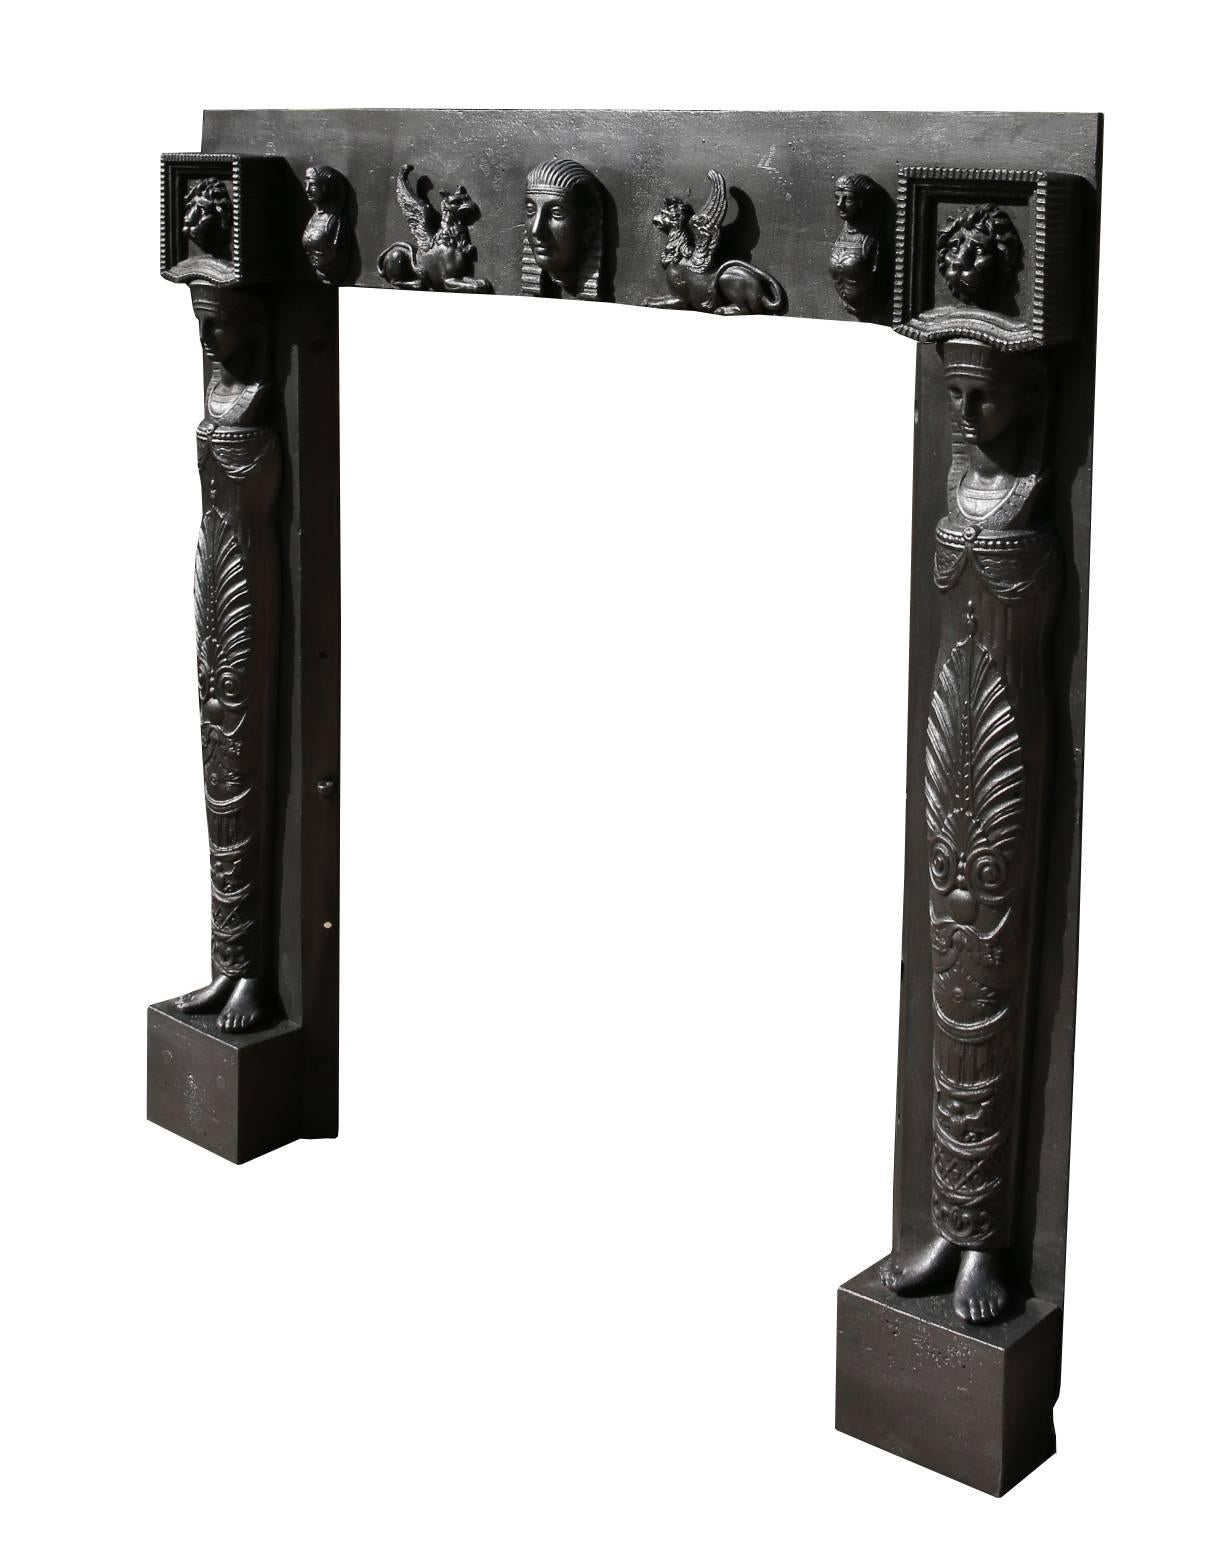 Cast Highly Decorated Fire Grate/Front in Egyptian Style, circa 1820